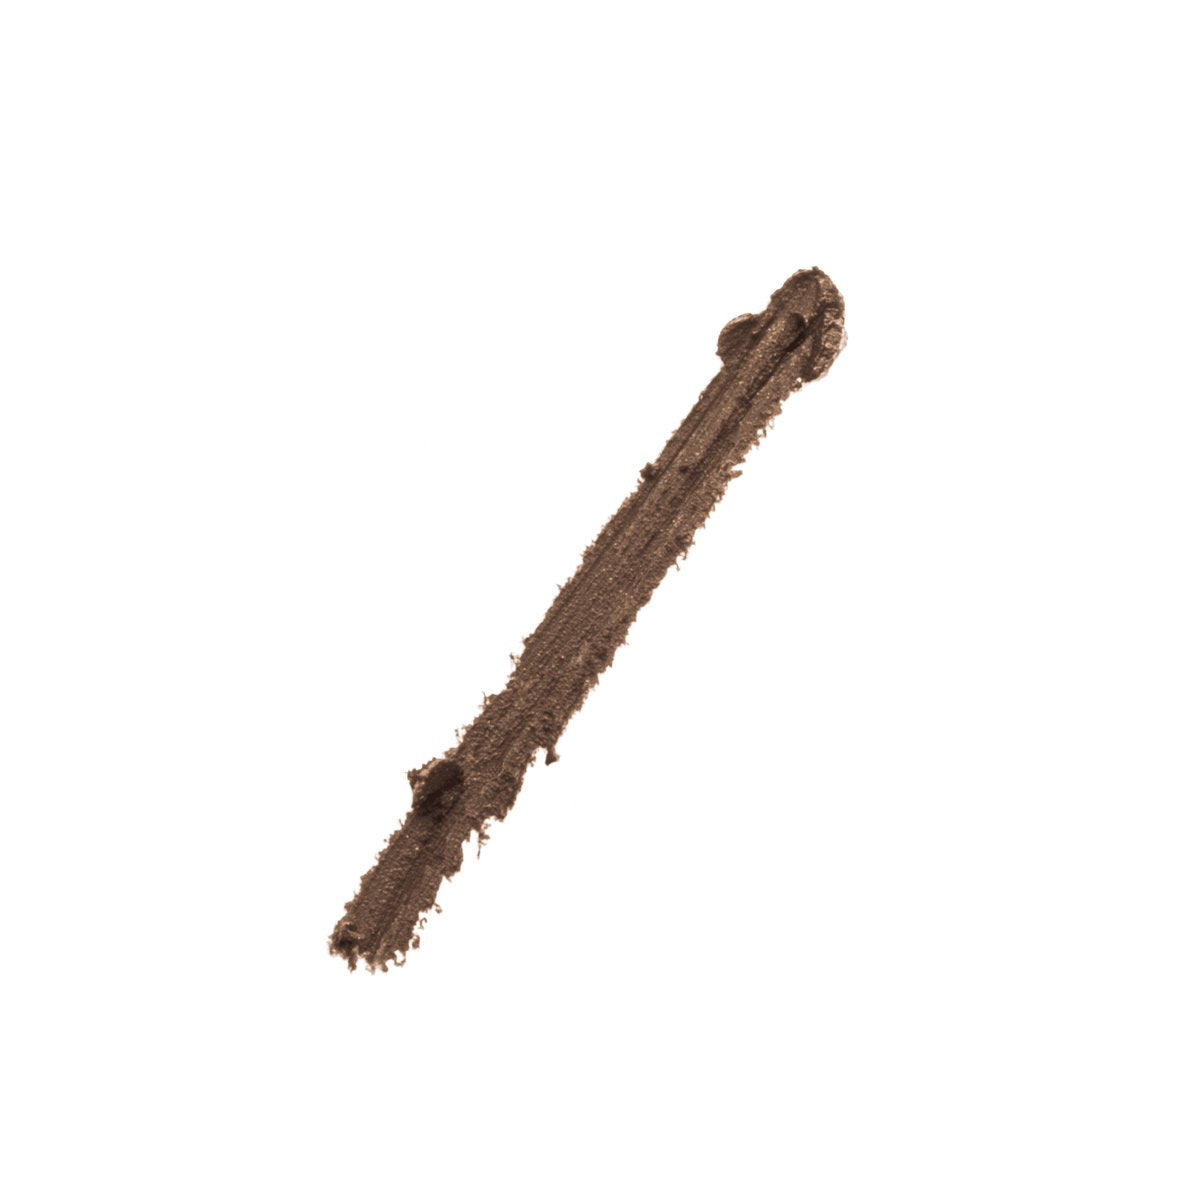 CENDRES - ASHY TAUPE - swatch of ash brown eye pencil